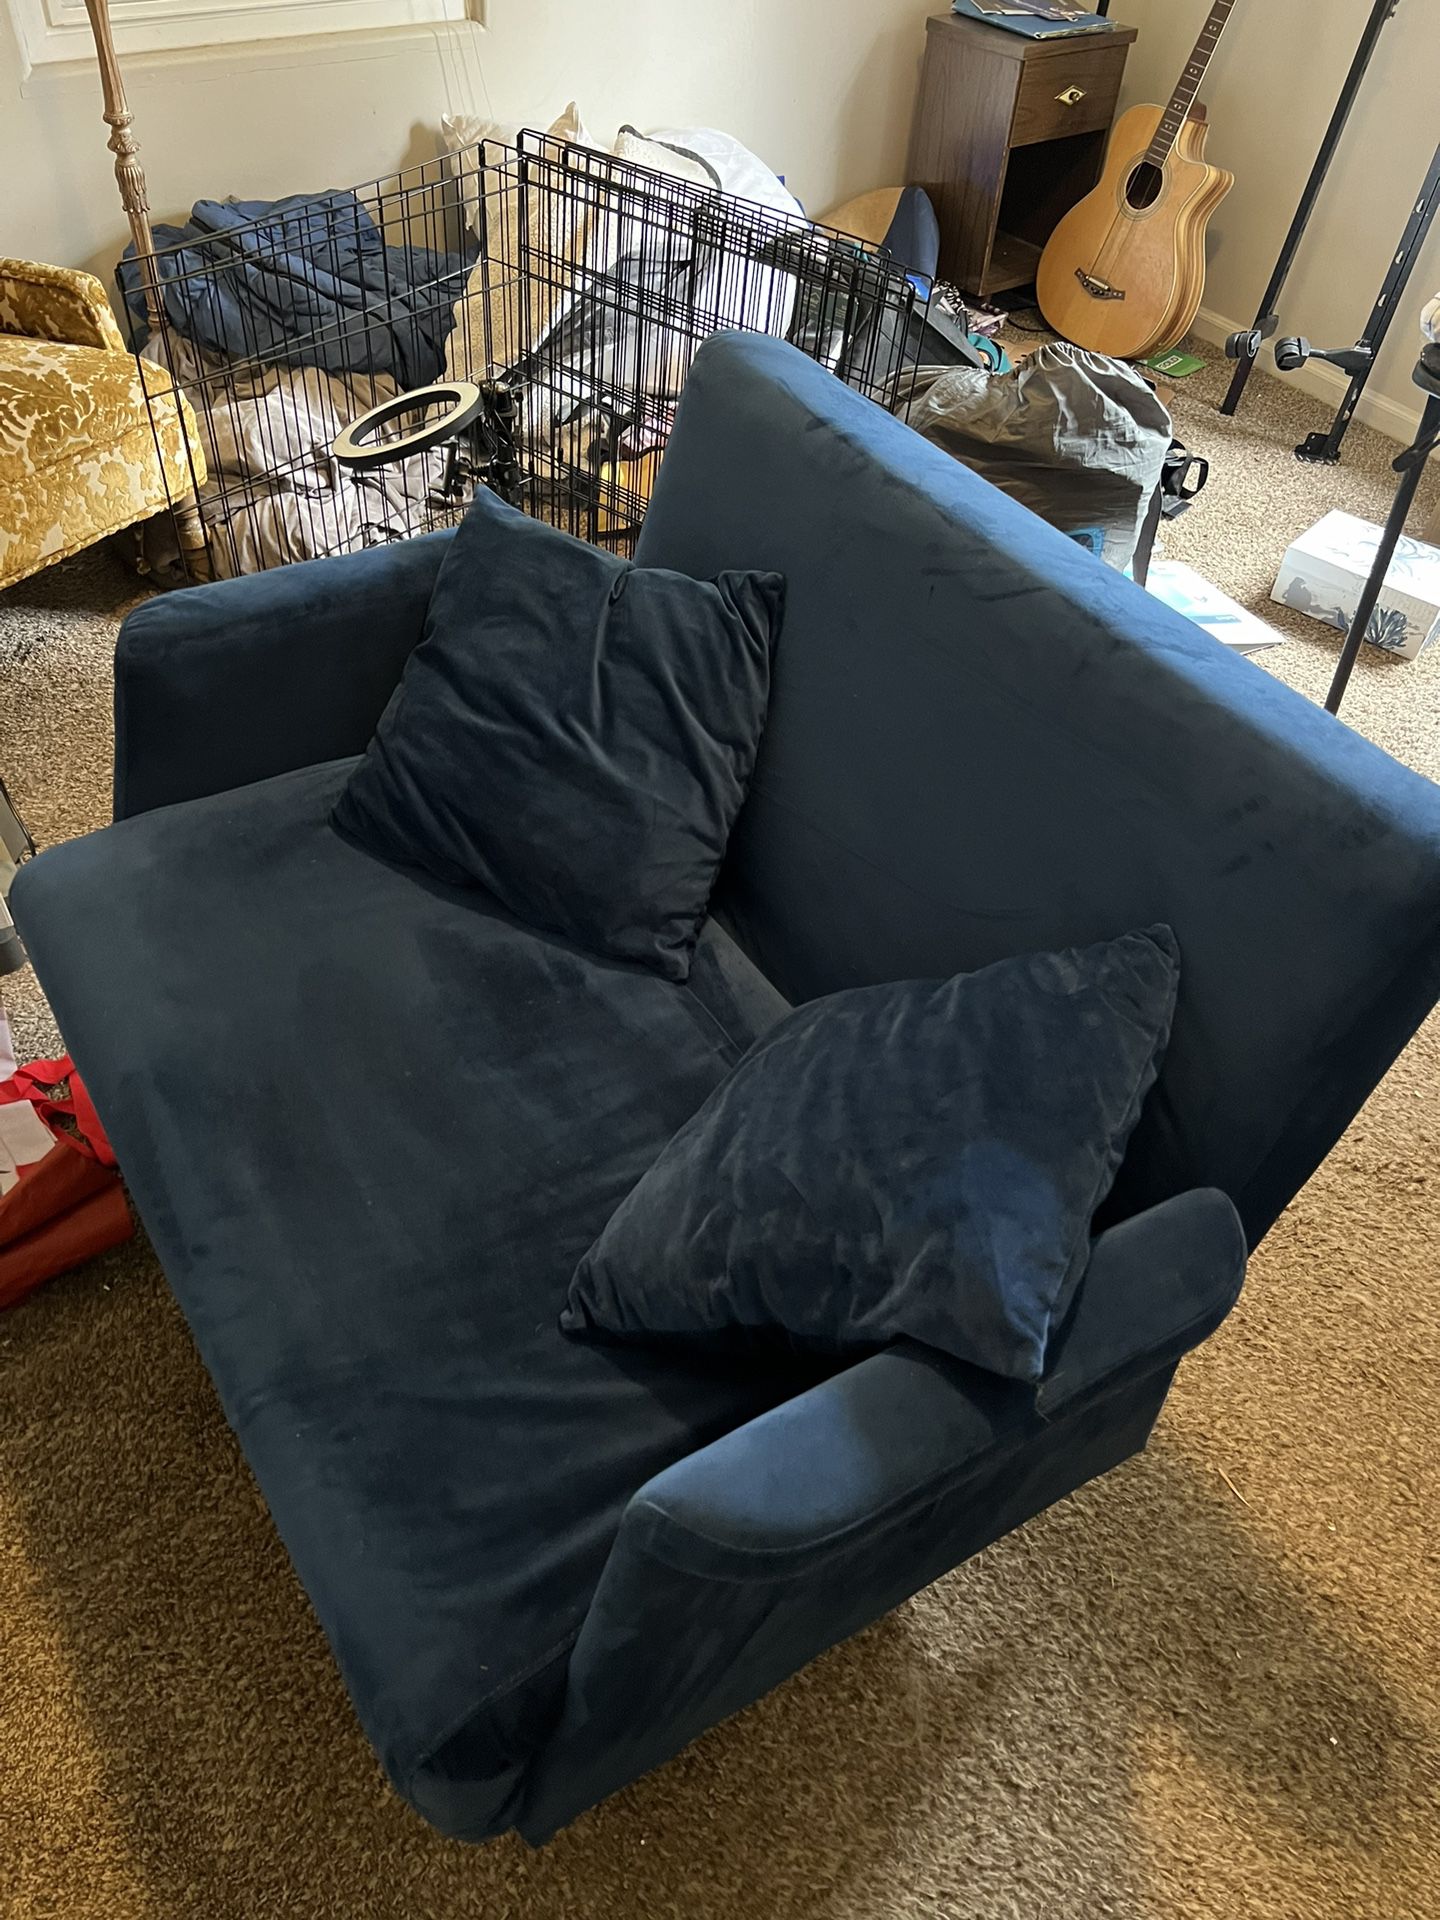 Blue Loveseat Couch